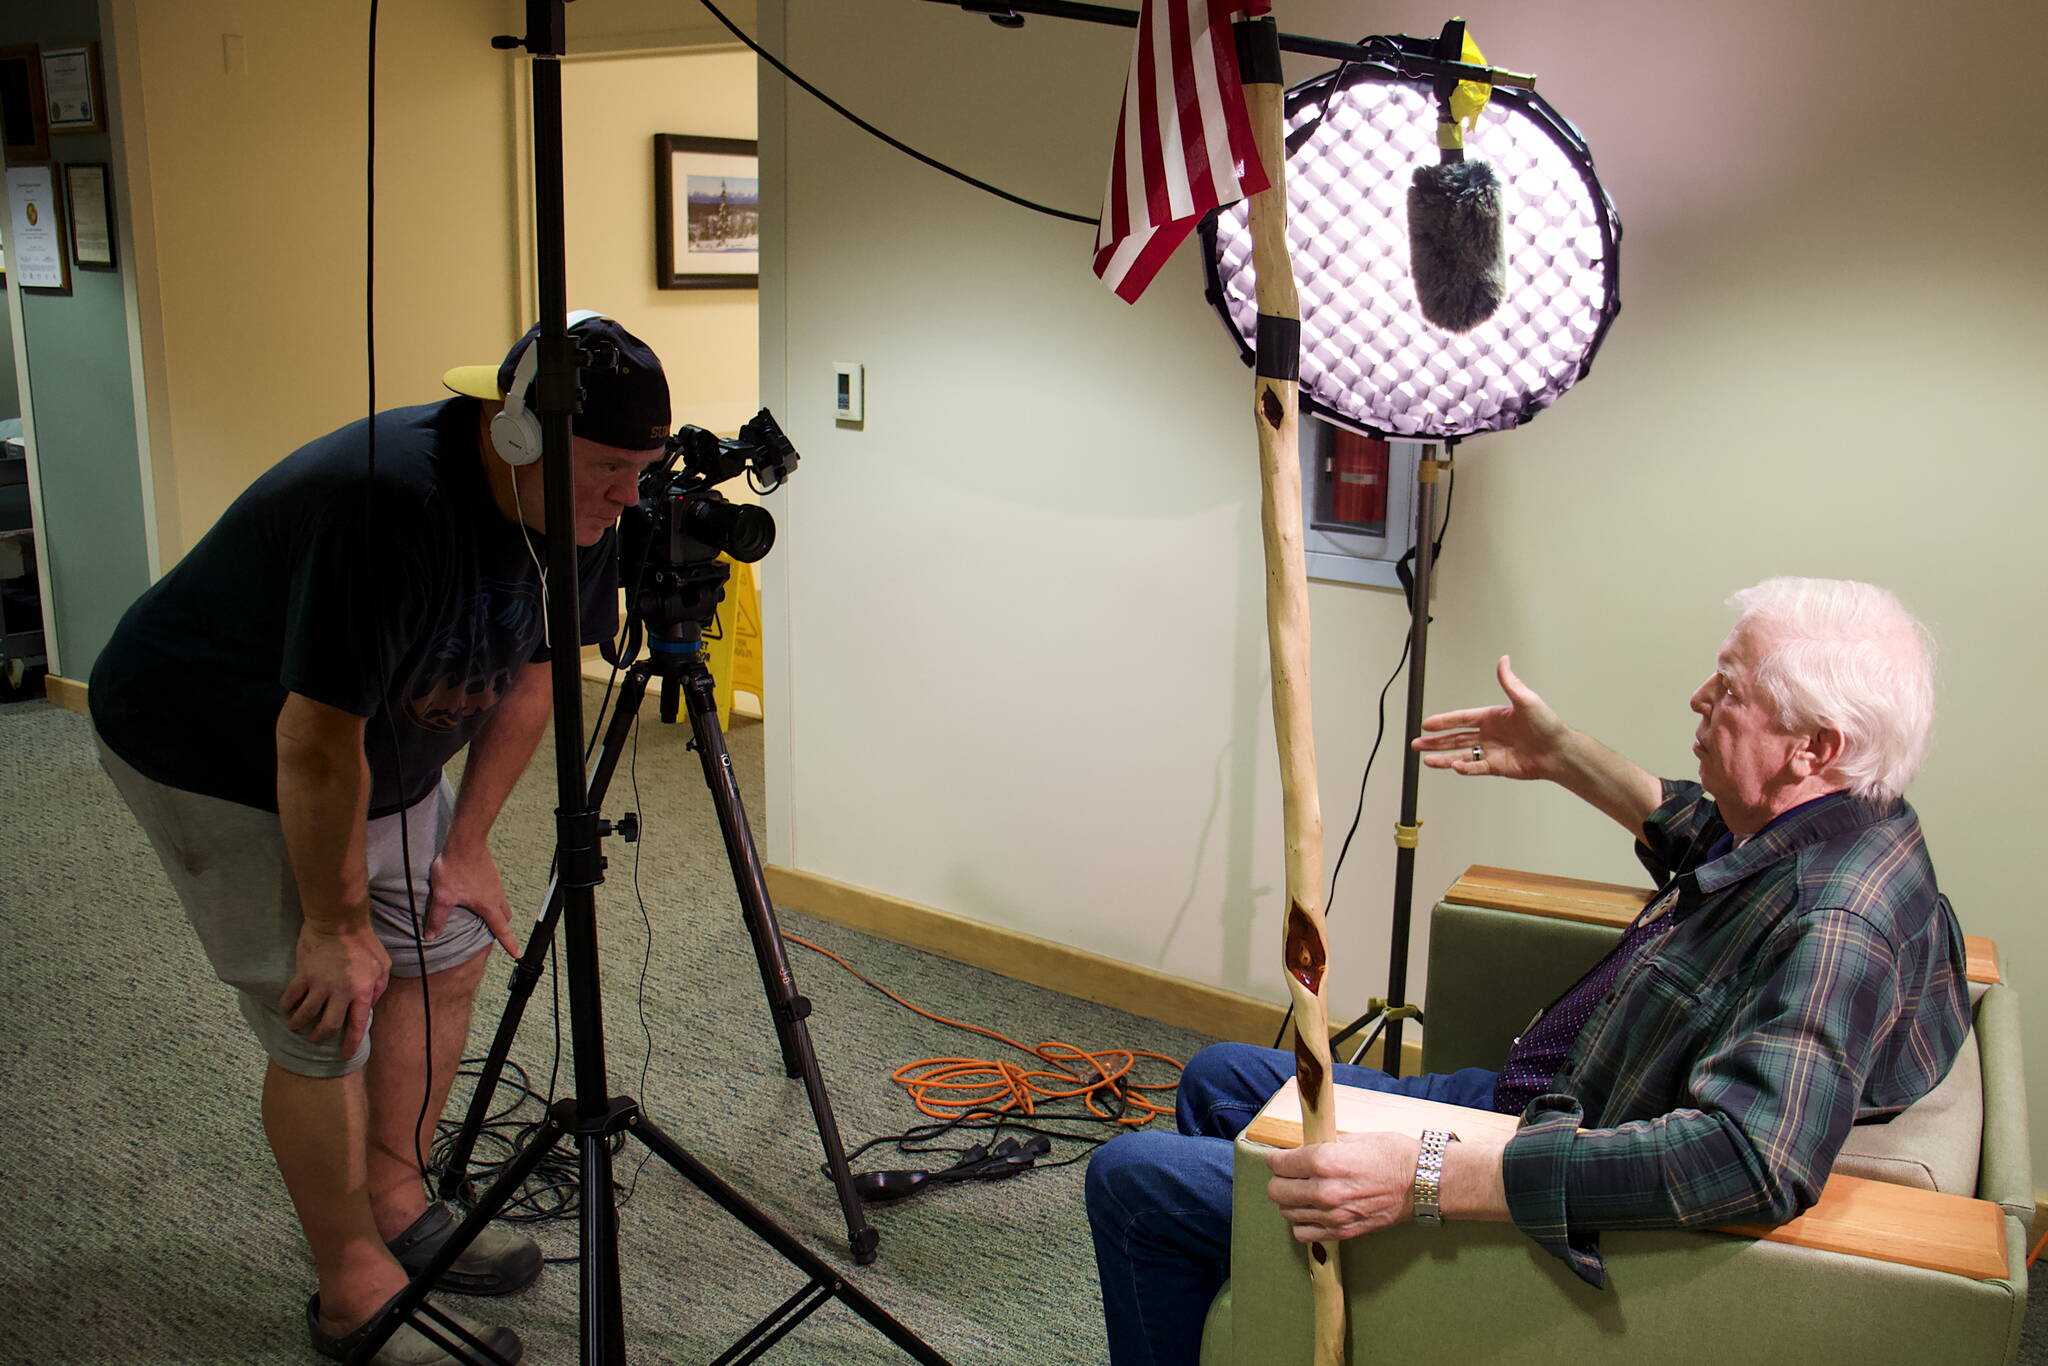 Mark Sabbatini / Juneau Empire
Jerry Adams (right) discusses what being a hospice and home care volunteer means to him while being filmed by Gabe Strong in a pop-up video booth in a hallway at Bartlett Regional Hospital. The filming, where people offering and receiving such services were invited to participate, was part a celebration of the hospital resuming hospice and home care services after they were discontinued by Catholic Community Service last fall.